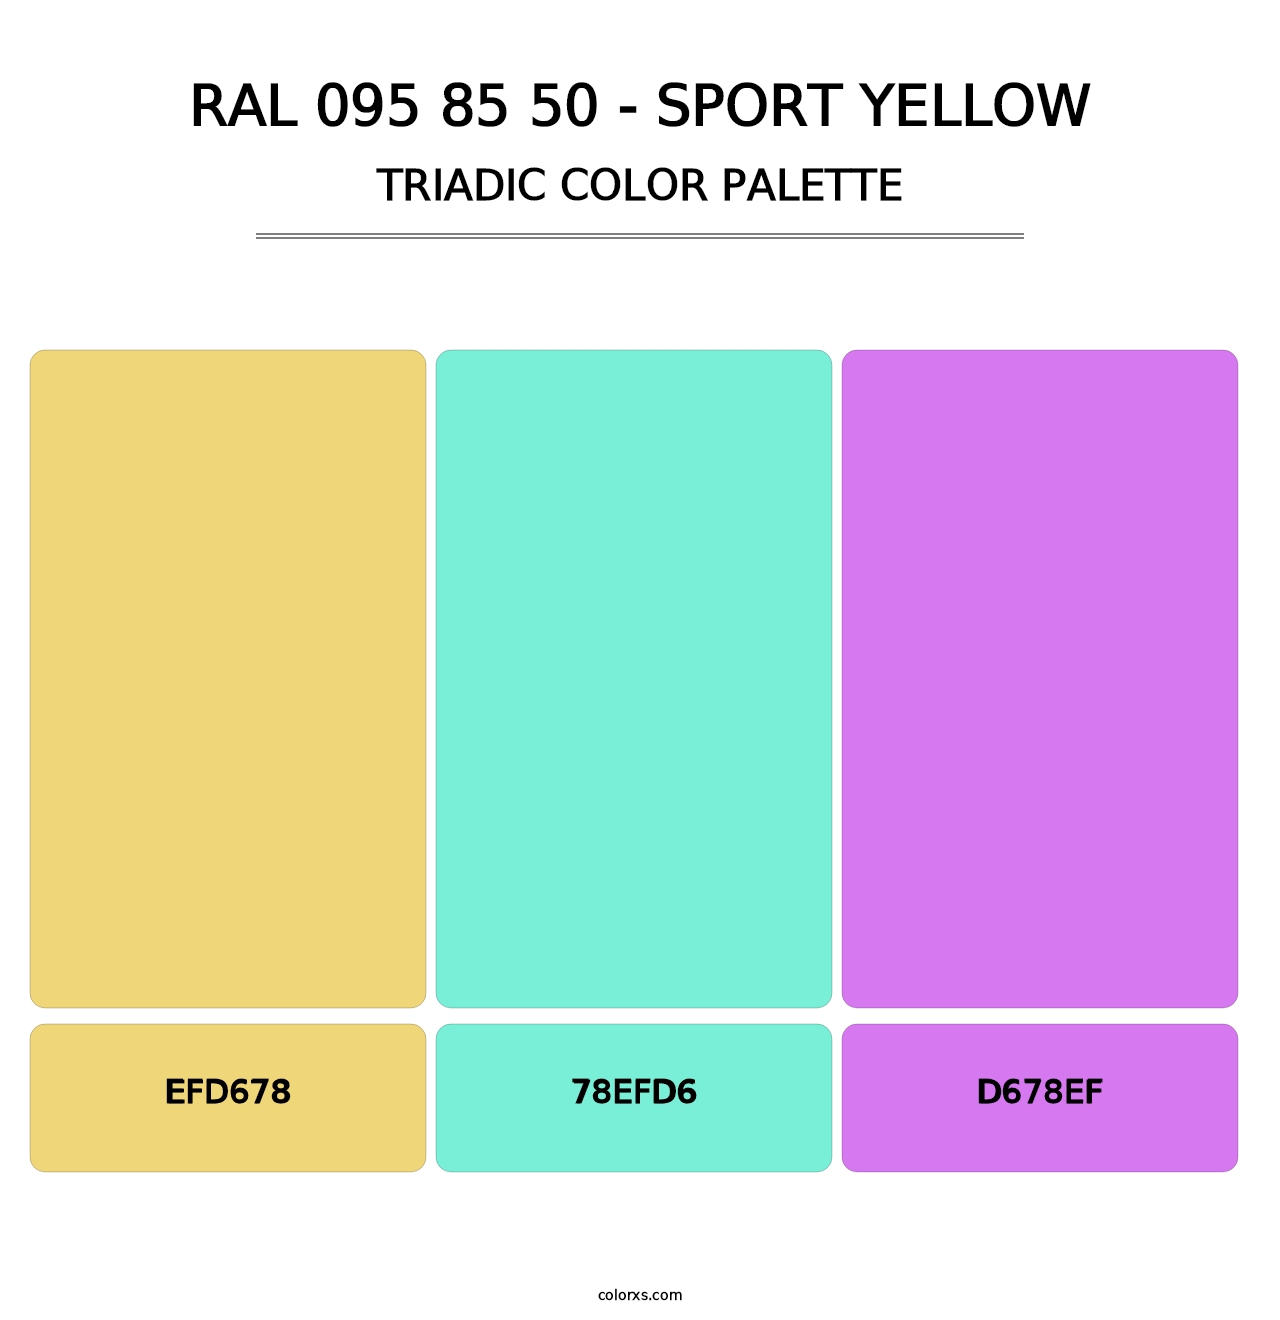 RAL 095 85 50 - Sport Yellow - Triadic Color Palette